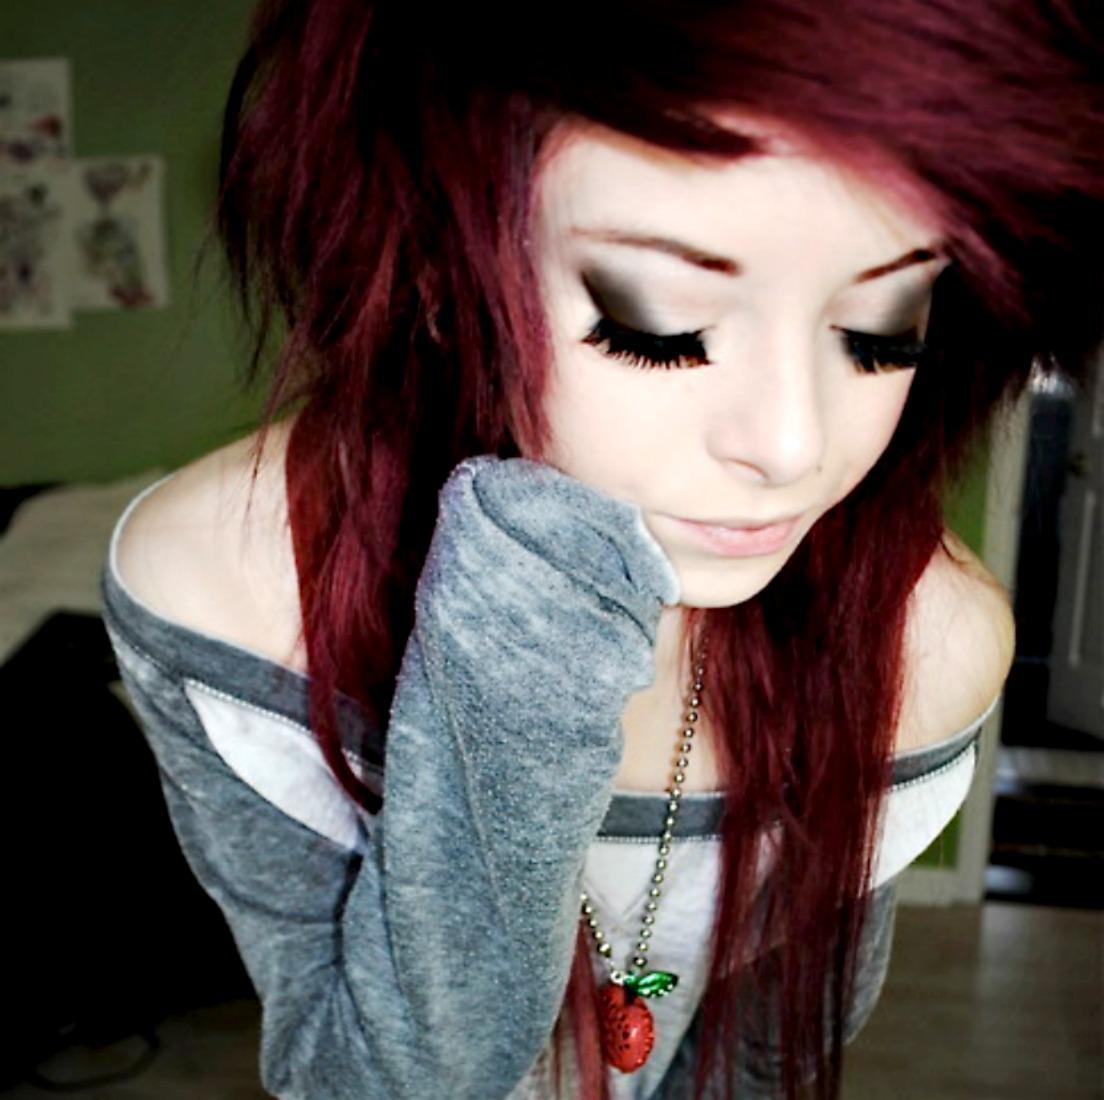 Emo Girls Wallpapers HD Pictures | One HD Wallpaper Pictures ...